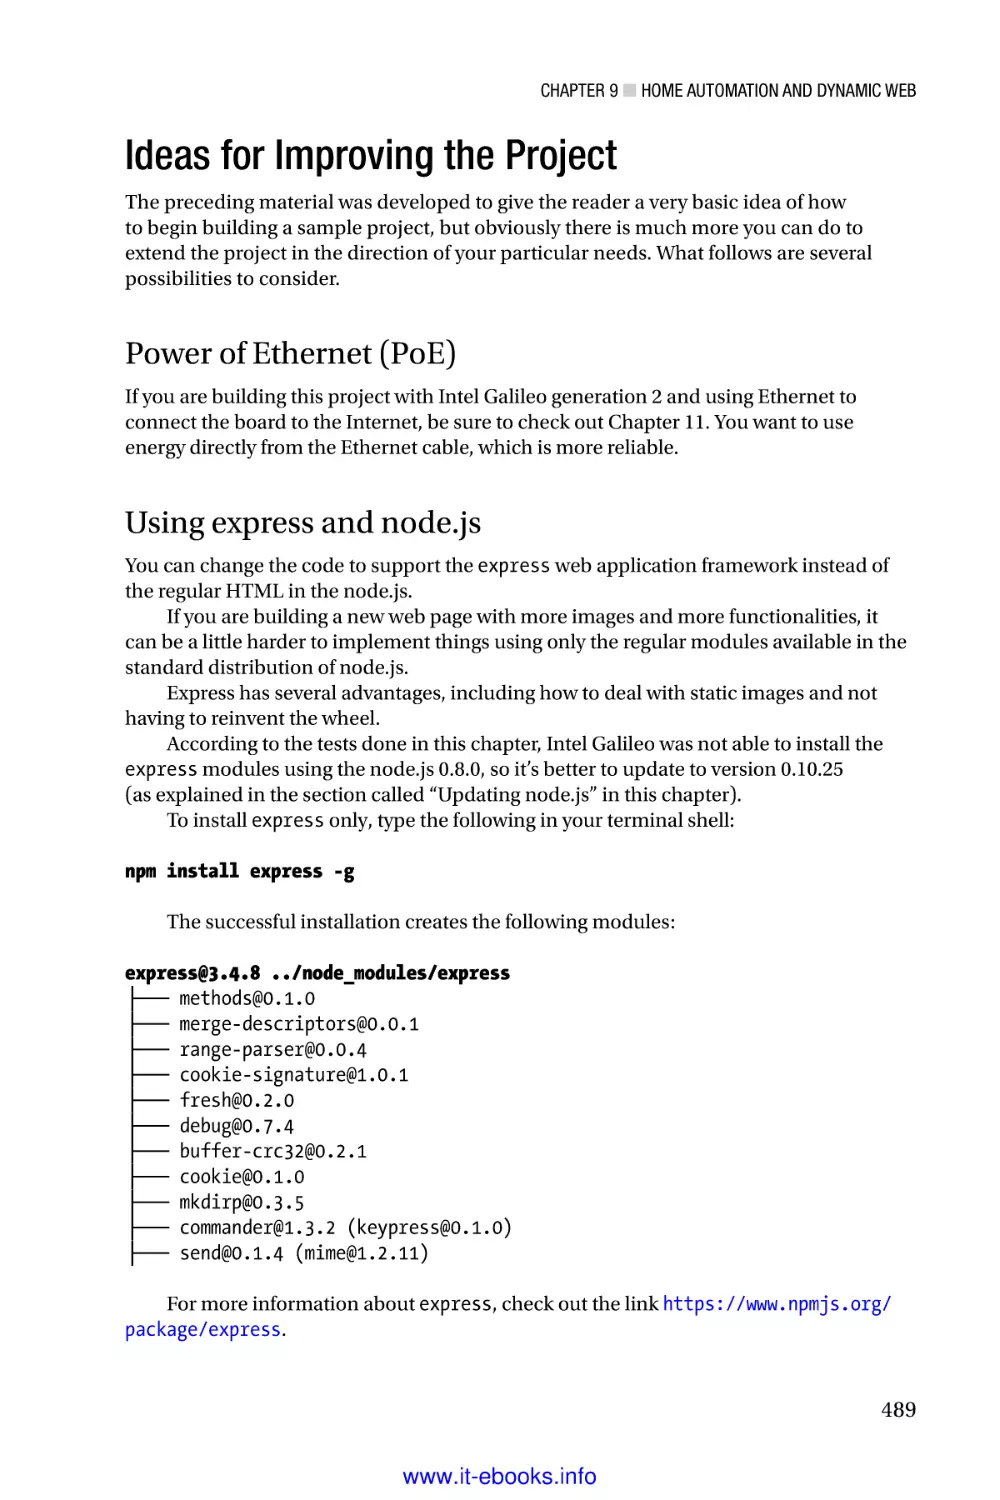 Ideas for Improving the Project
Power of Ethernet ( PoE)
Using express and node.js